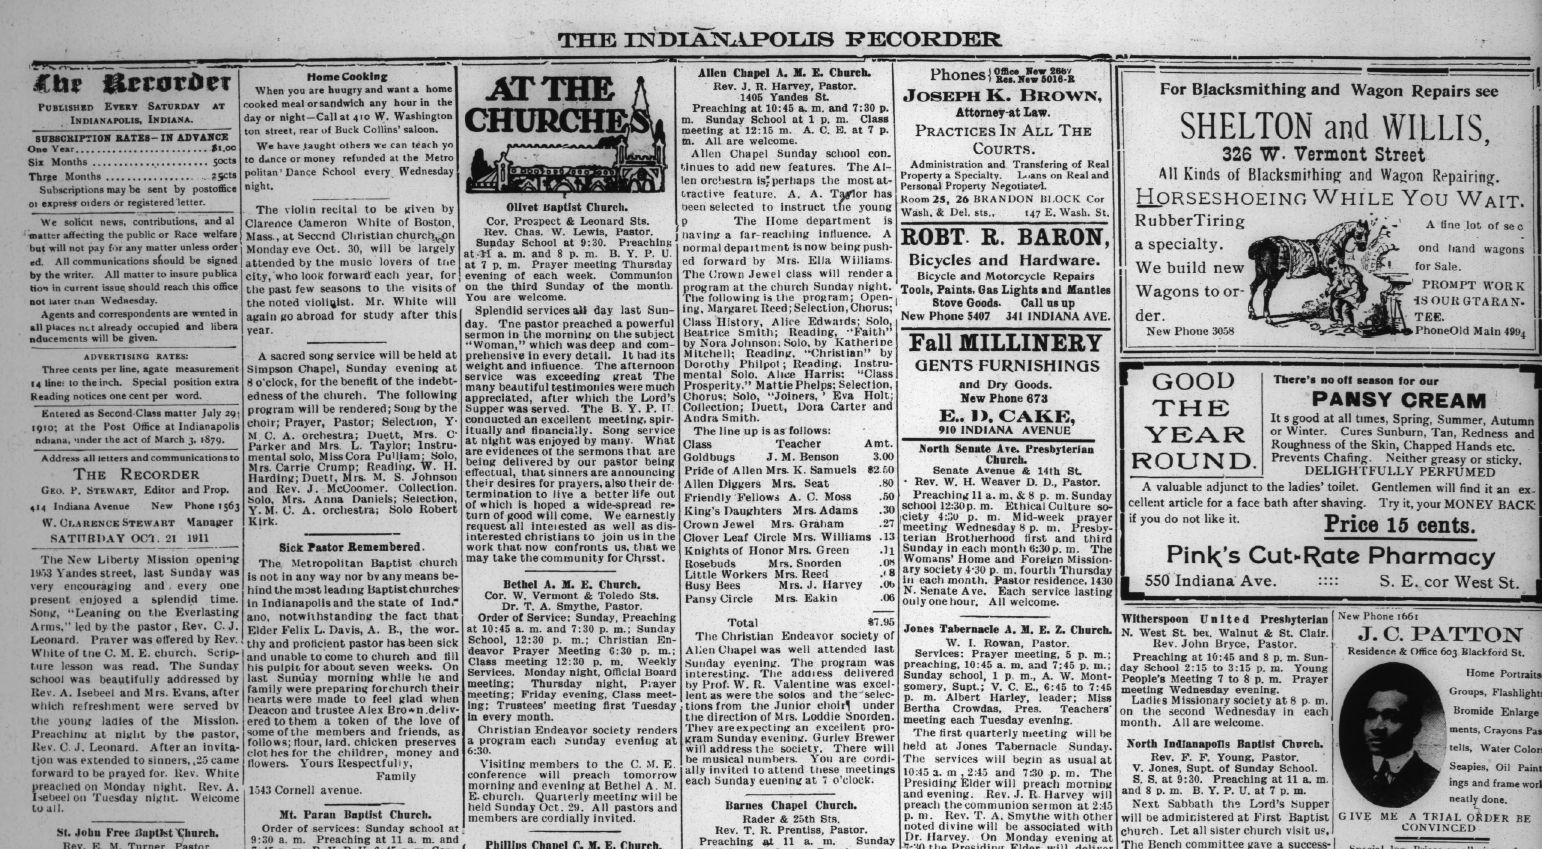 Indianapolis Recorder Newspaper INR-1911-10-21_01_0002